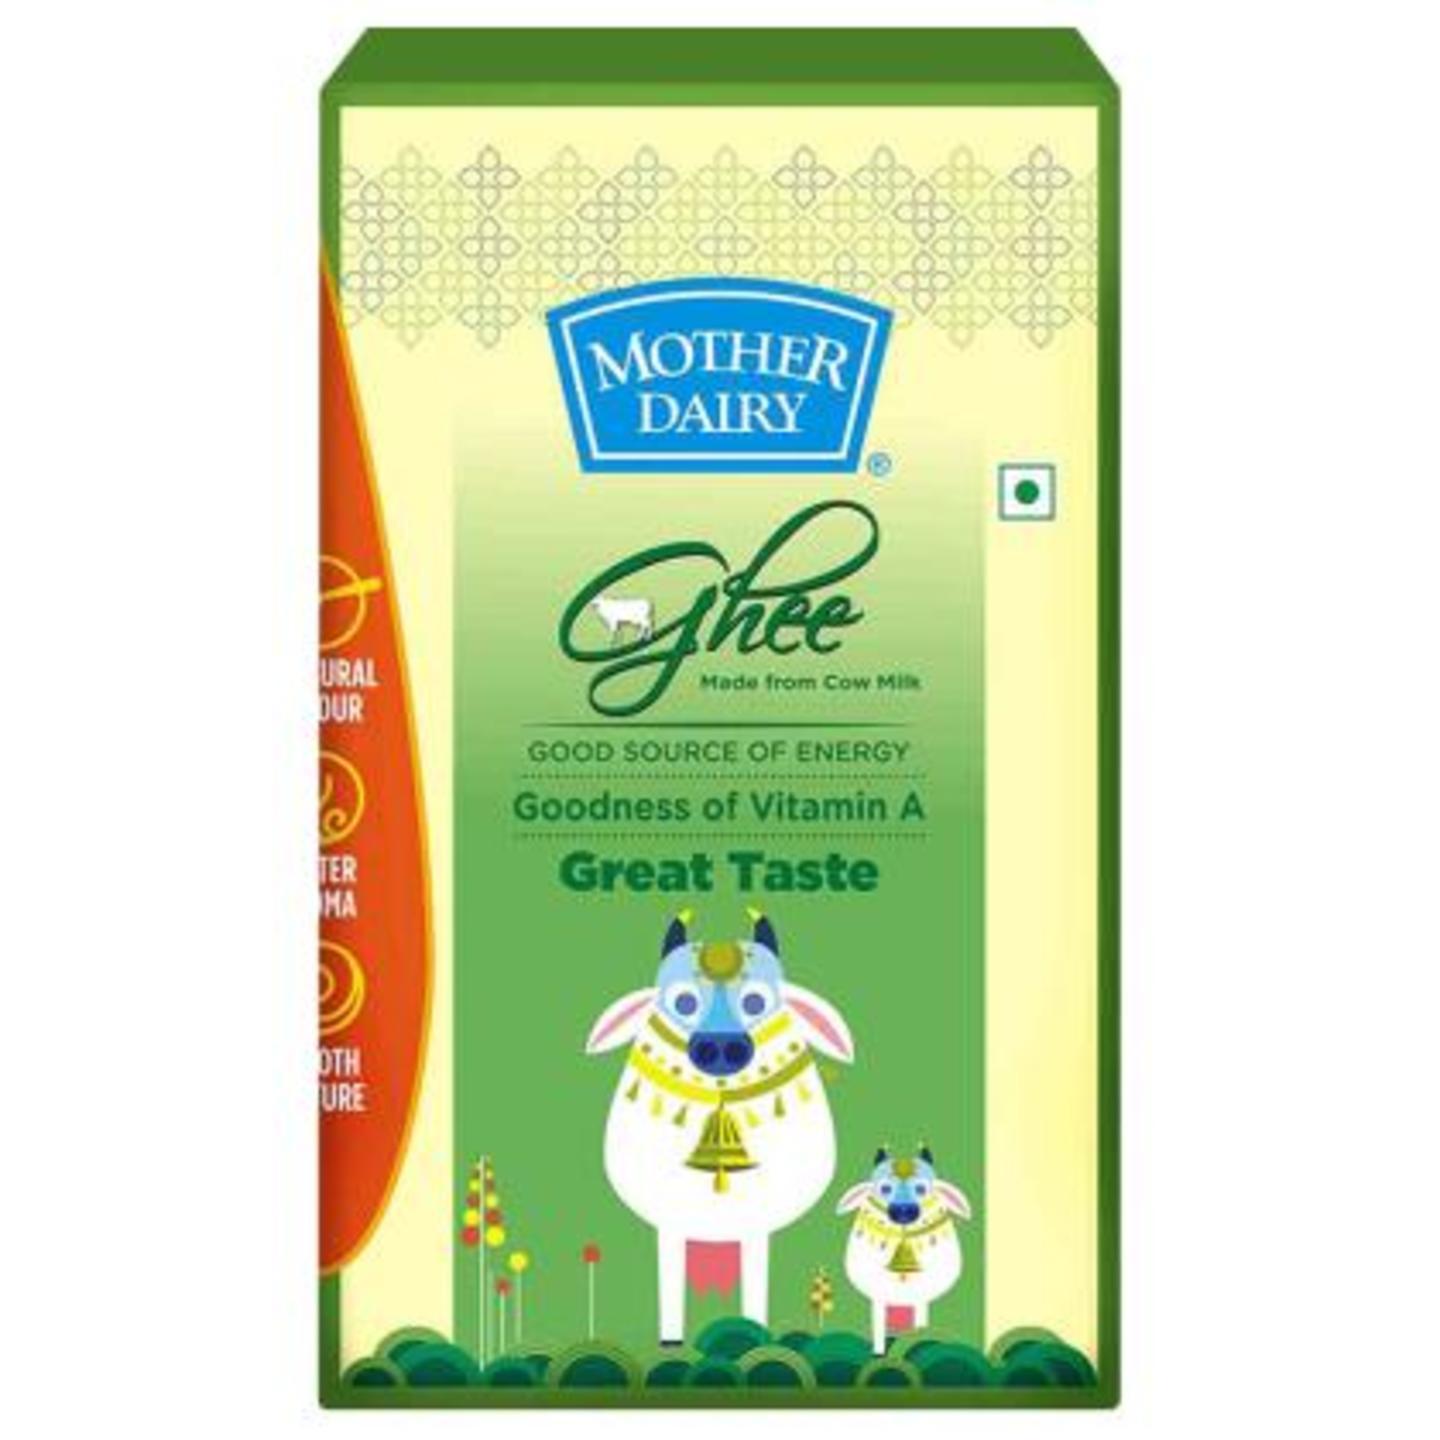 Mother Dairy Cow Ghee 1 L (Pouch) PM/BM 0.3/36